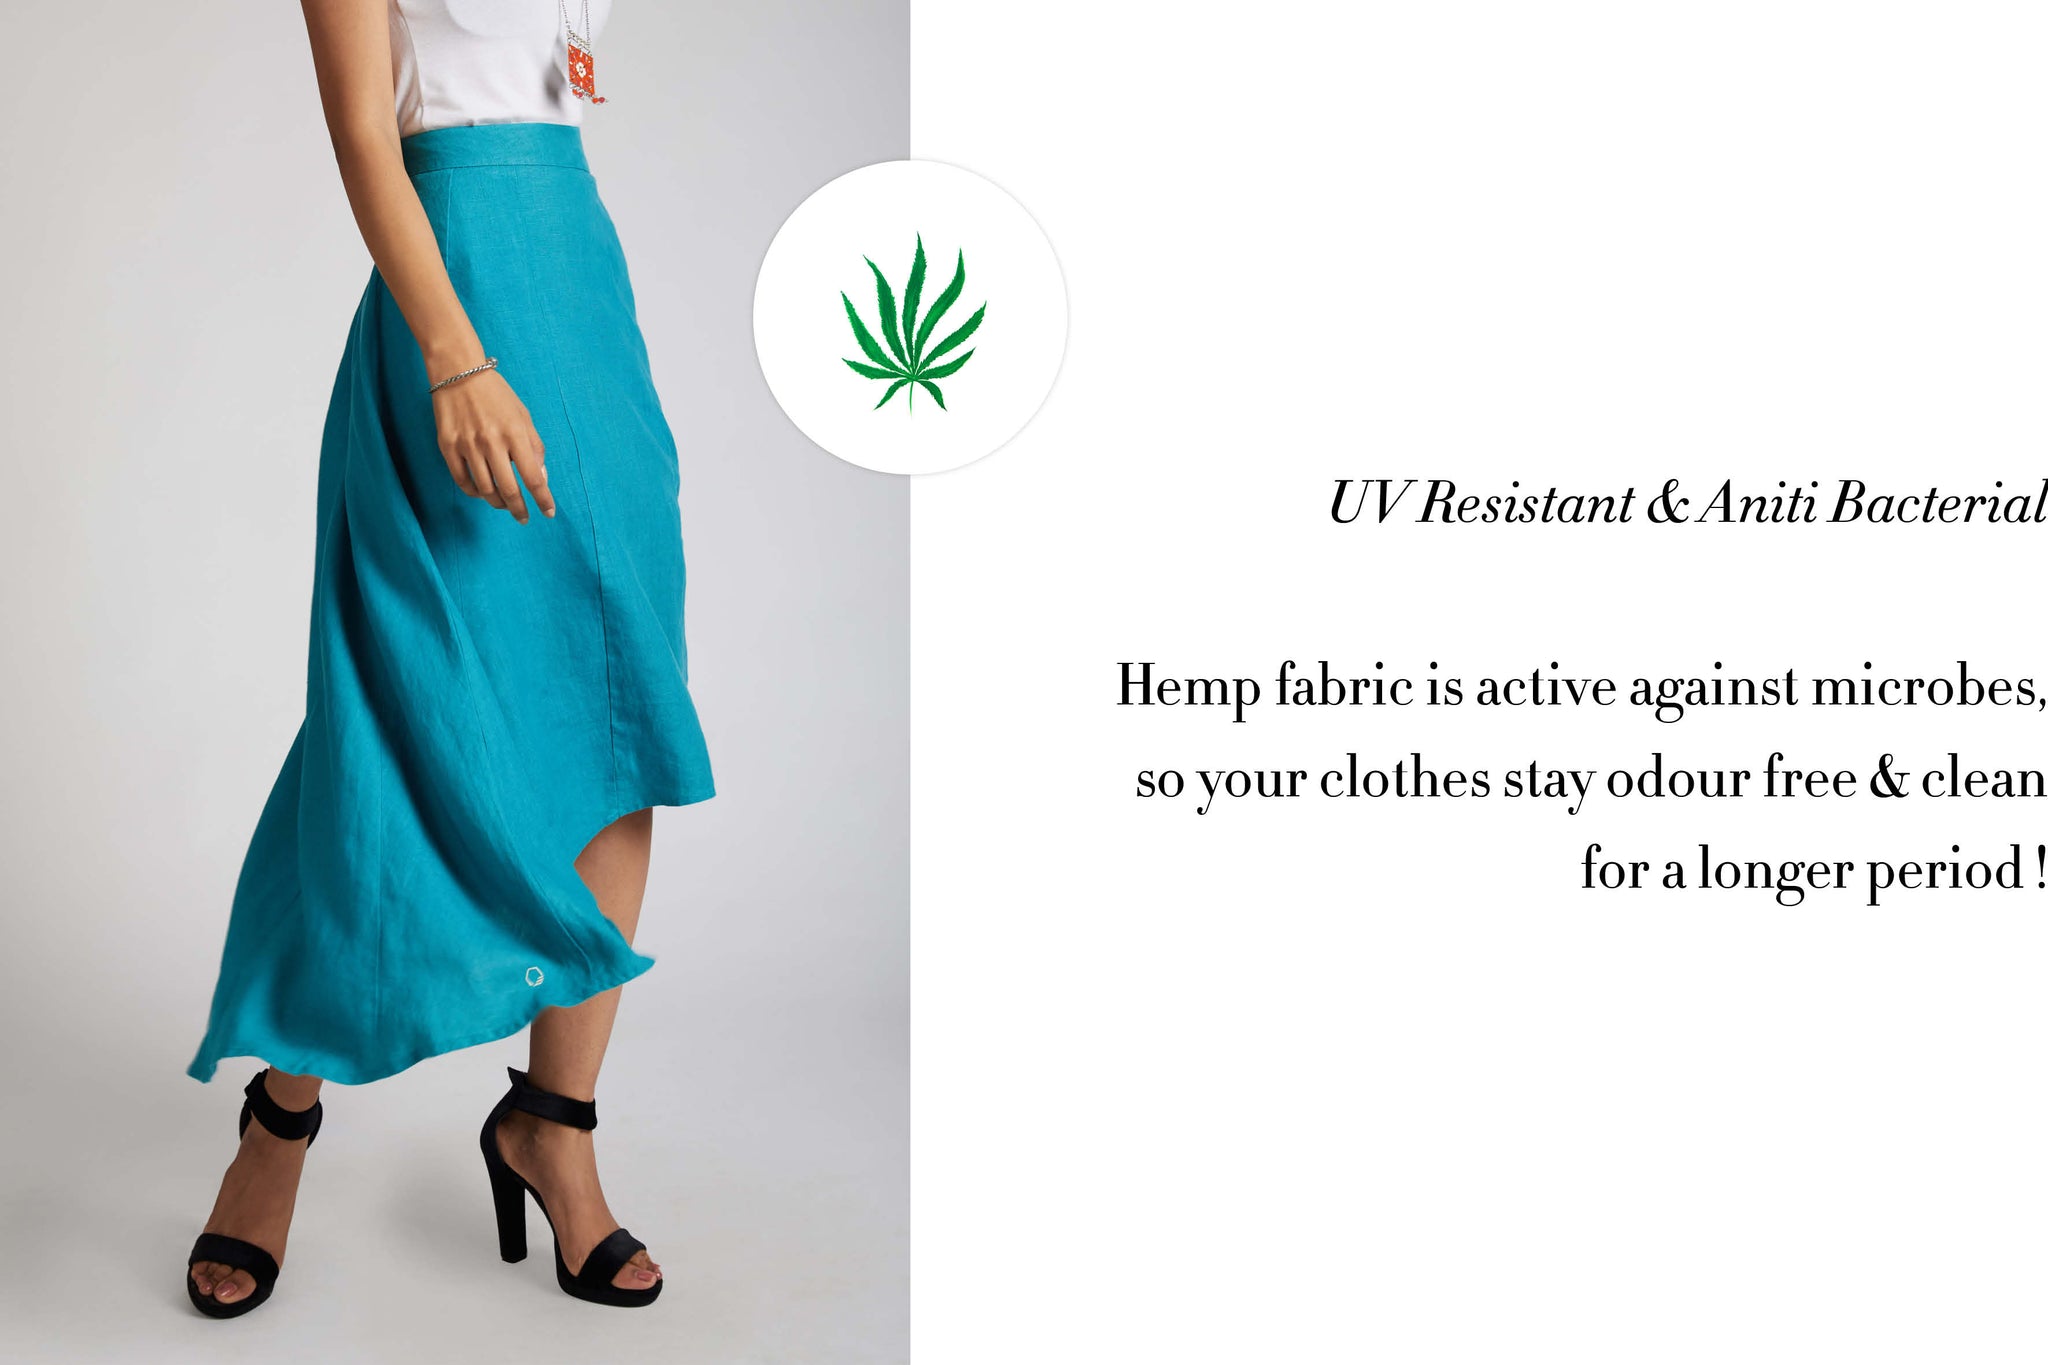 UV resistant and anti bacterial . hemp fabric is active against microbes, so your clothes stay odor free and clean for a longer period